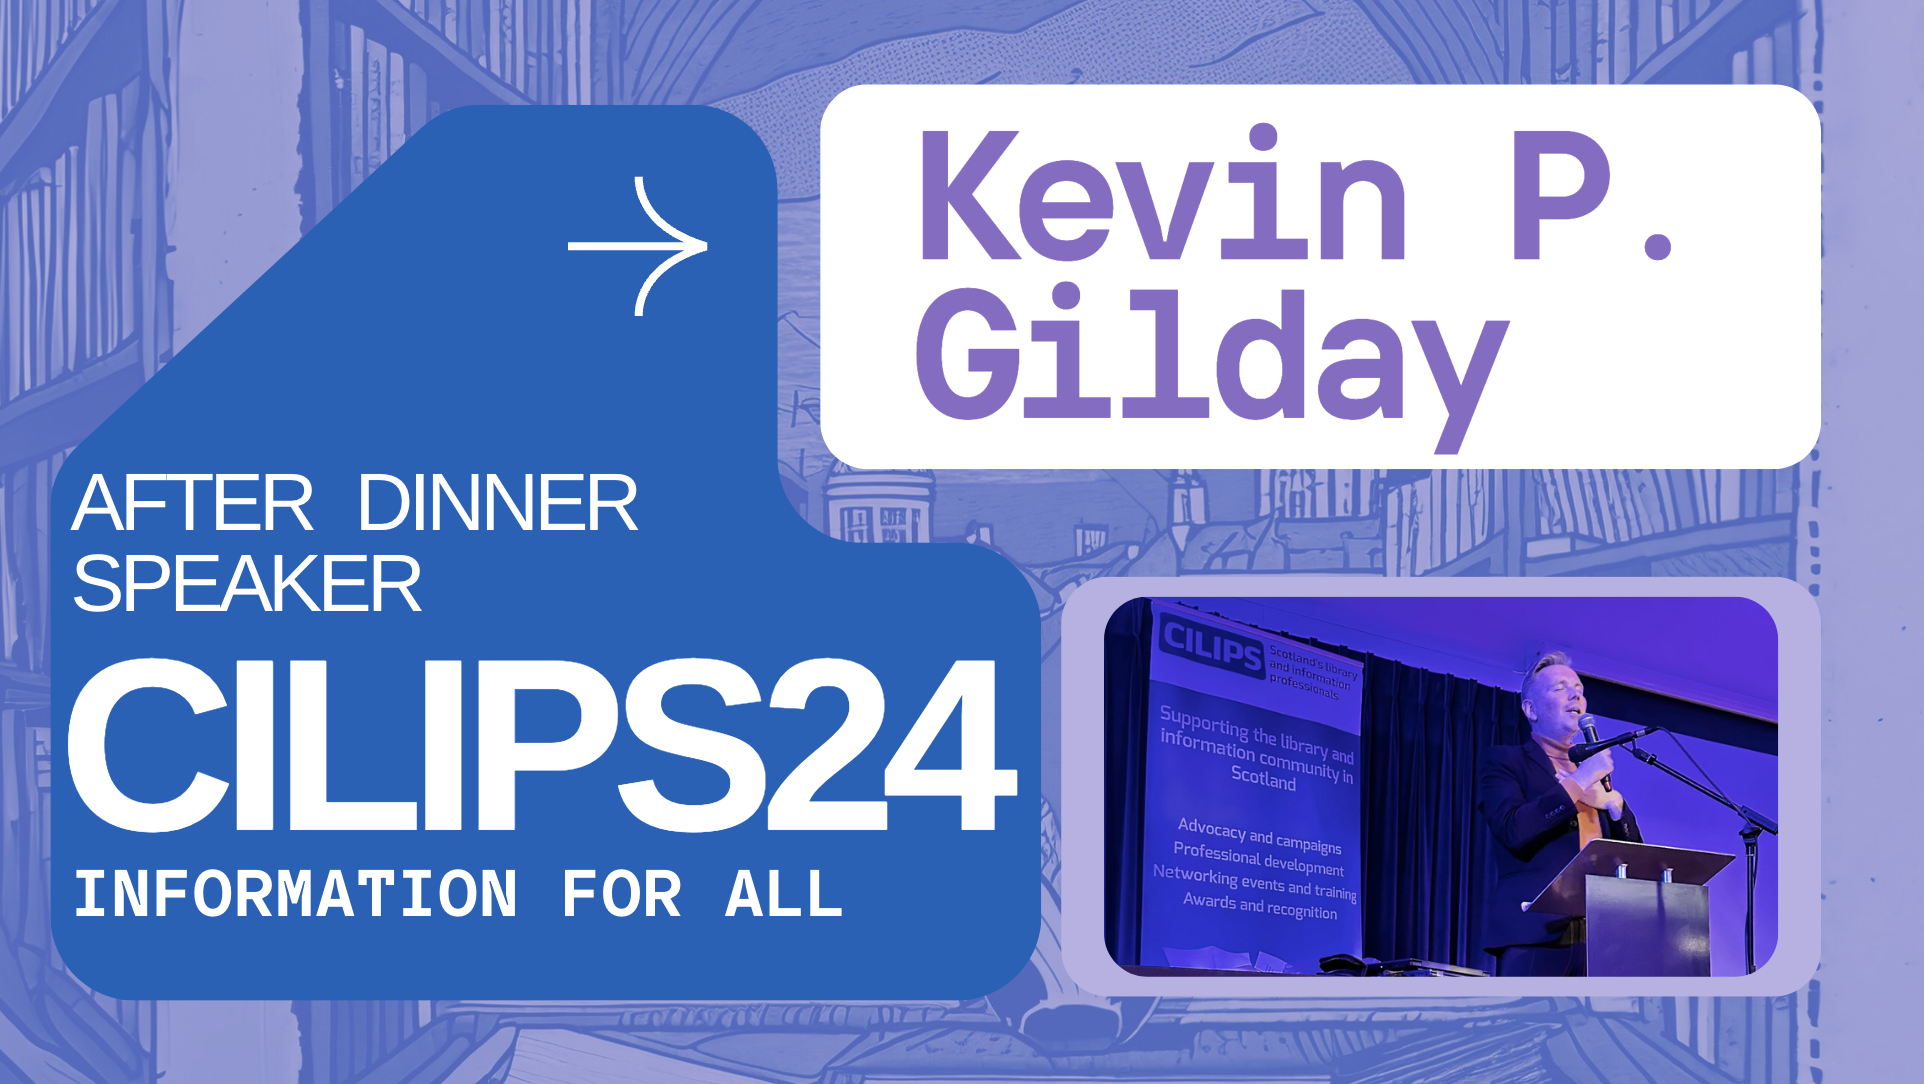 After Dinner Speaker, CILIPS24, Information for All. Kevin P. Gilday. Featuring image of Kevin Addressing the audience